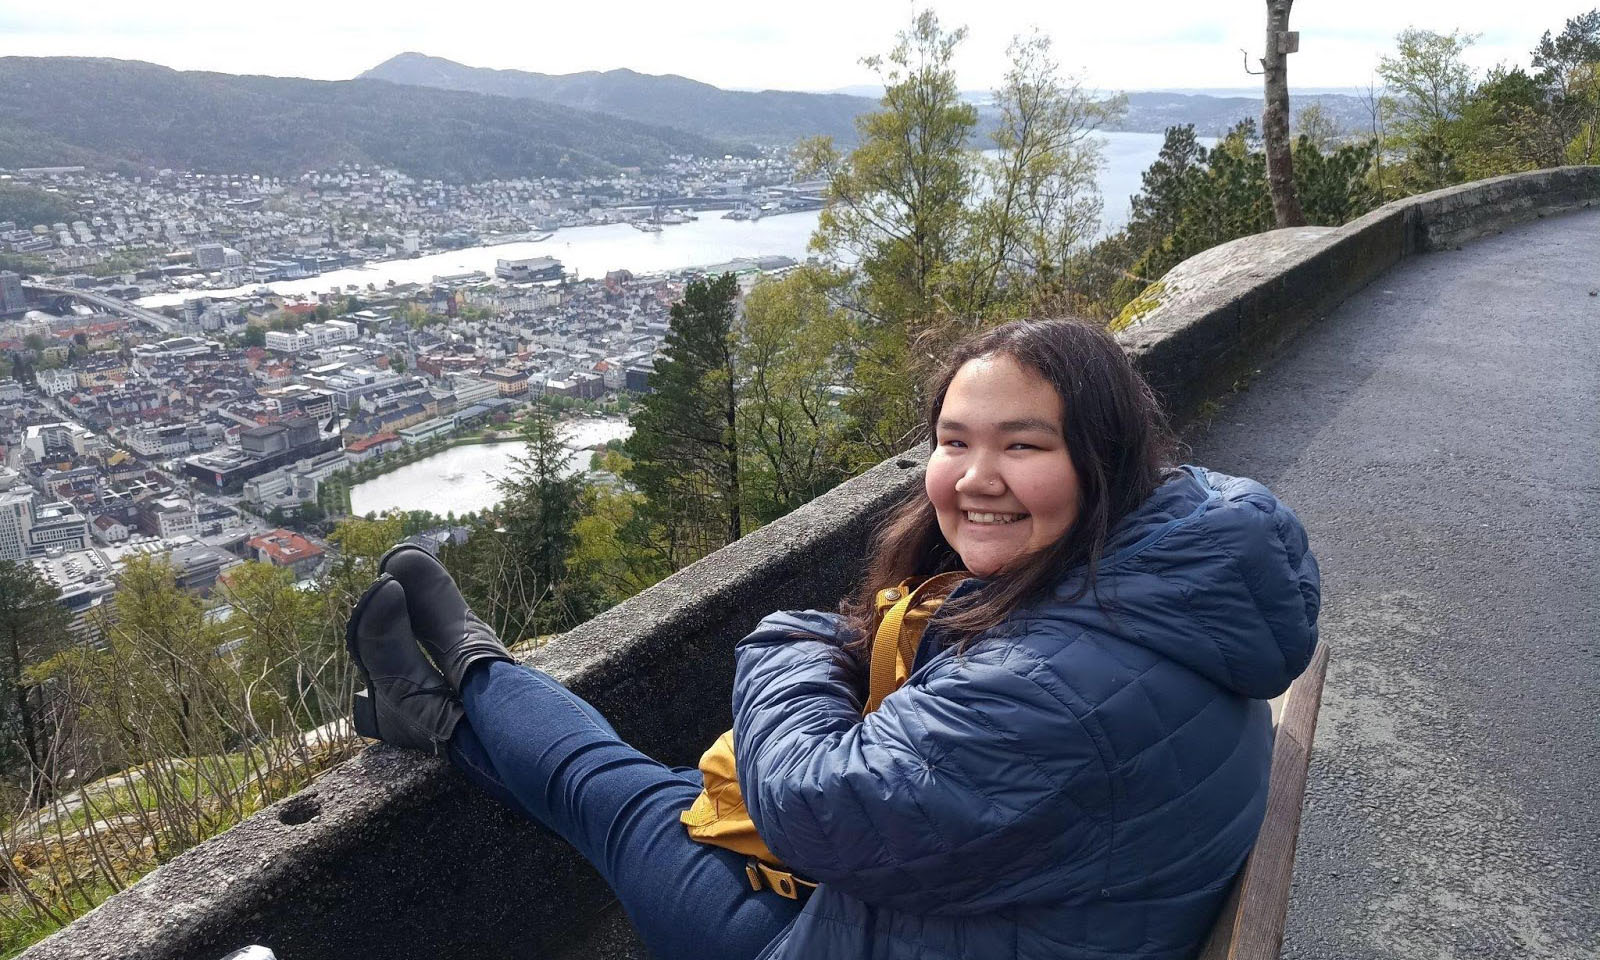 Linfield student enjoying the view in Bergen, Norway